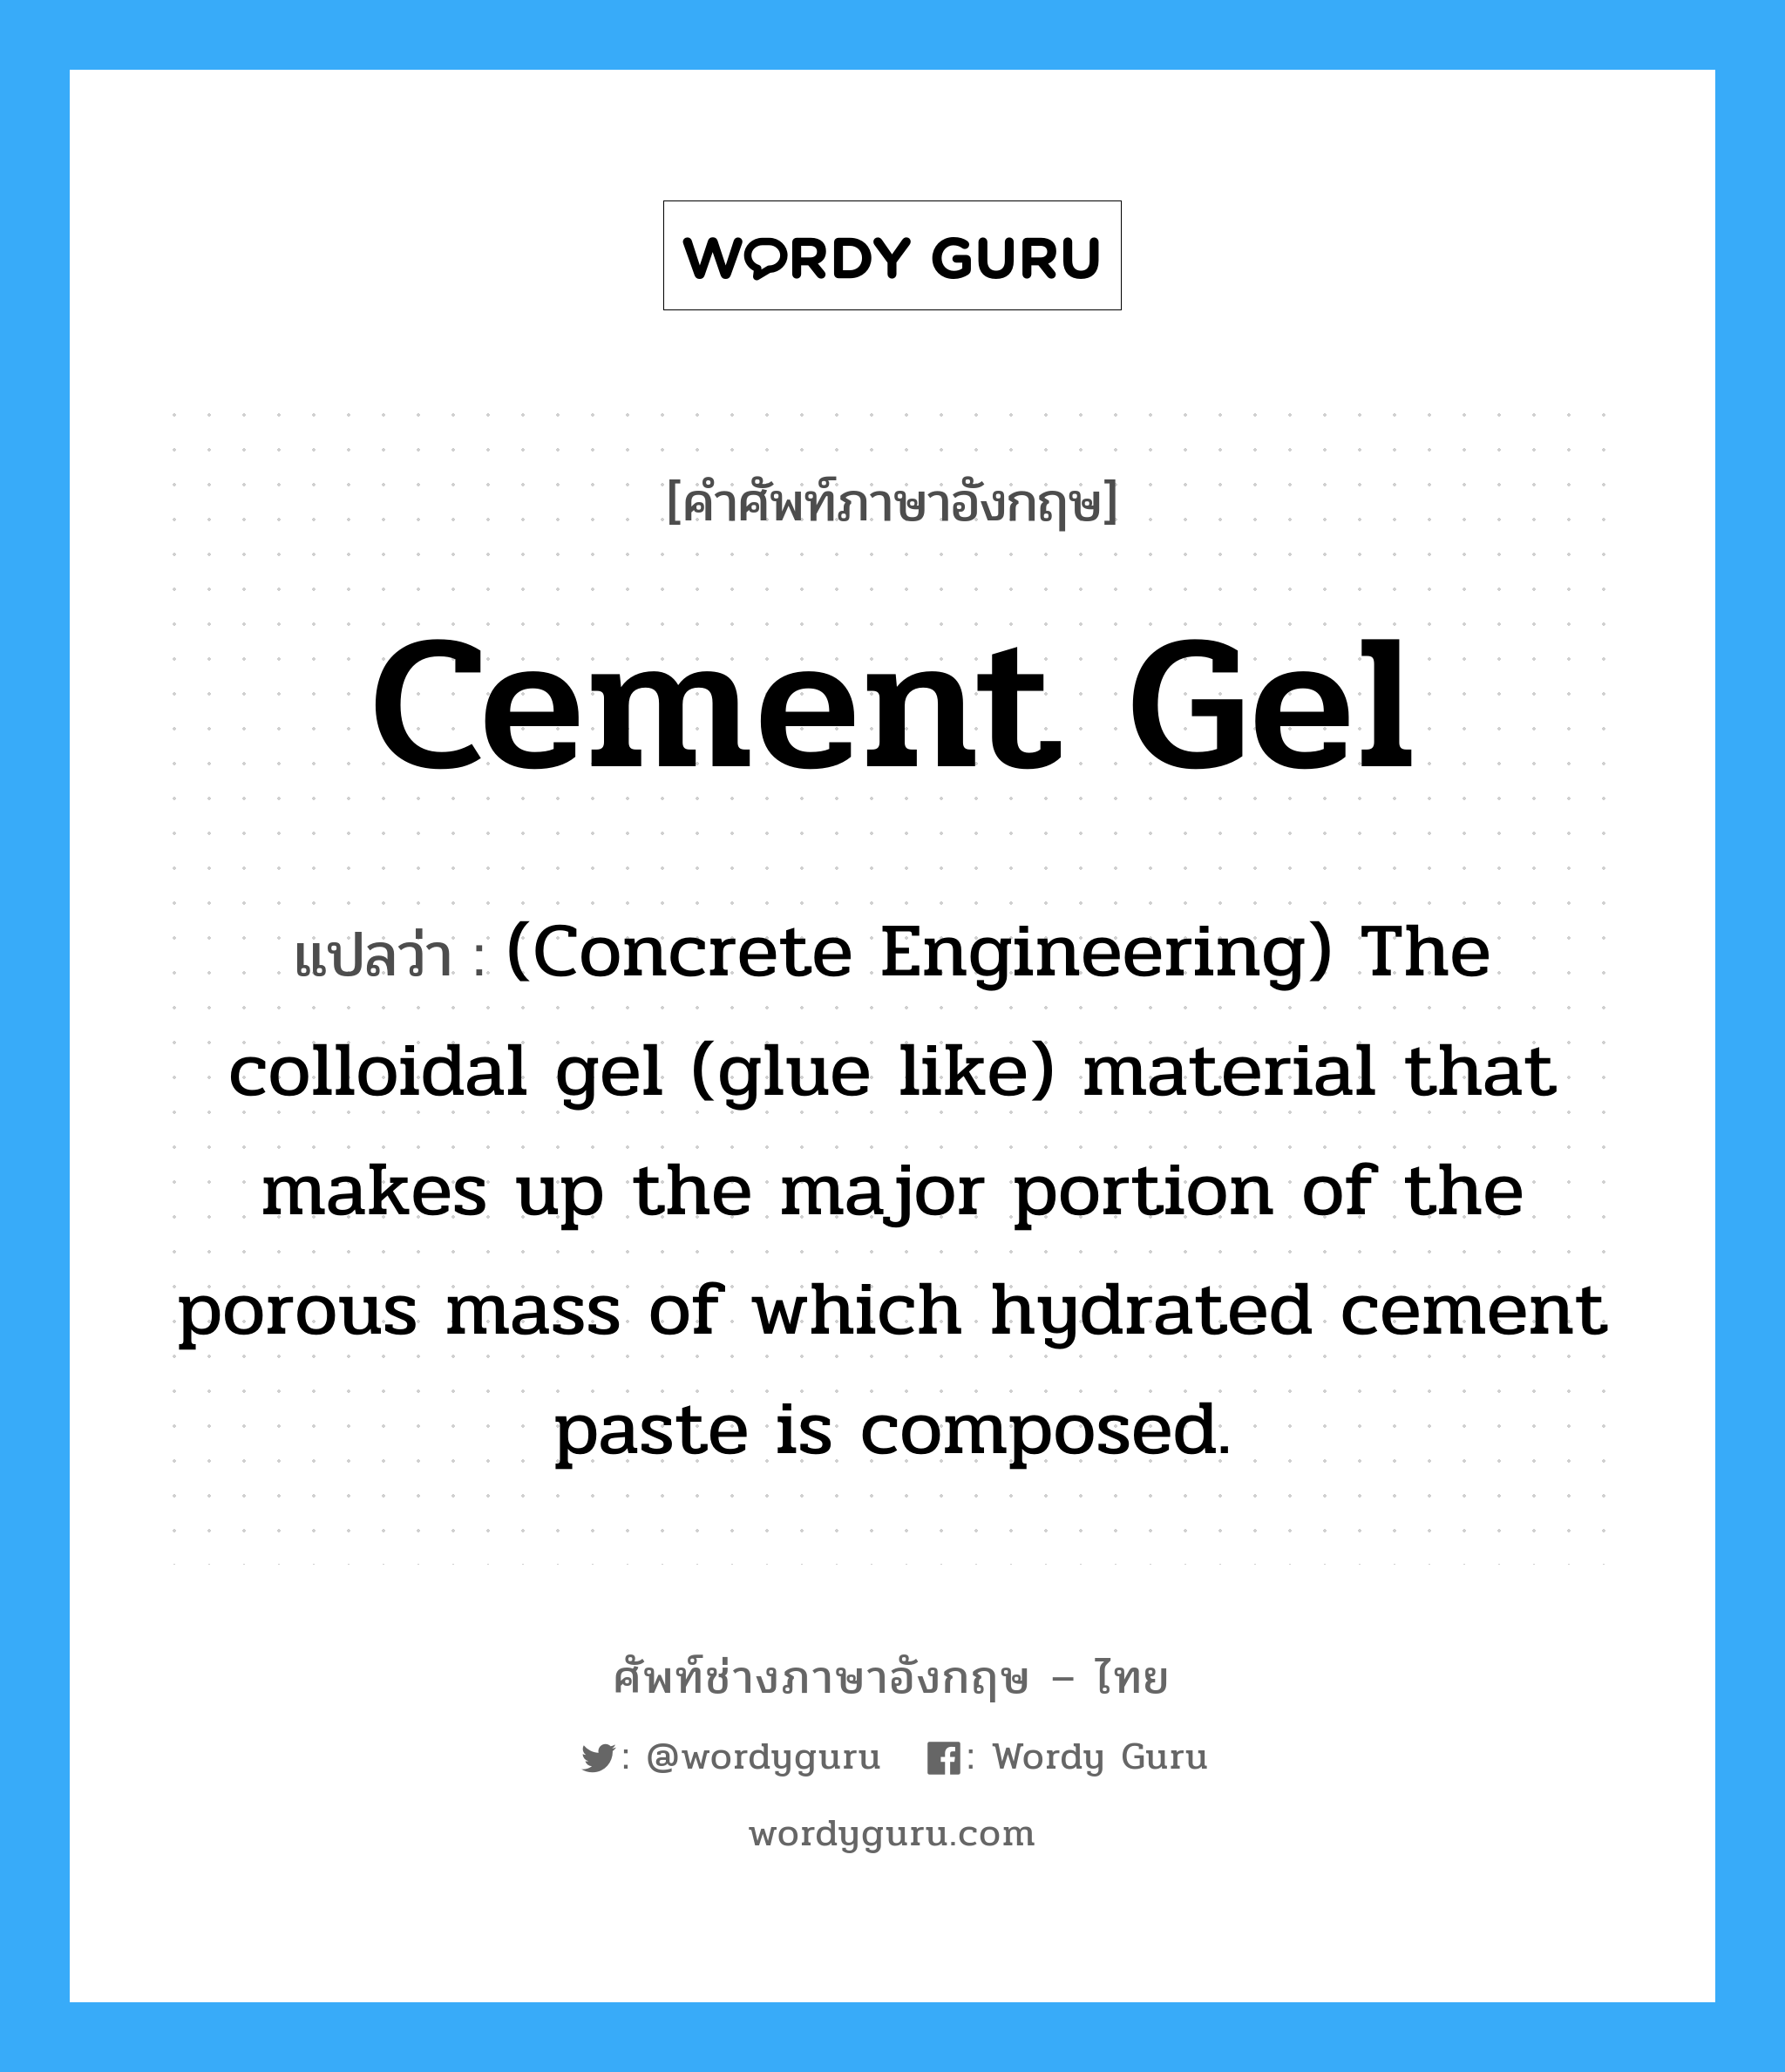 Cement Gel แปลว่า?, คำศัพท์ช่างภาษาอังกฤษ - ไทย Cement Gel คำศัพท์ภาษาอังกฤษ Cement Gel แปลว่า (Concrete Engineering) The colloidal gel (glue like) material that makes up the major portion of the porous mass of which hydrated cement paste is composed.